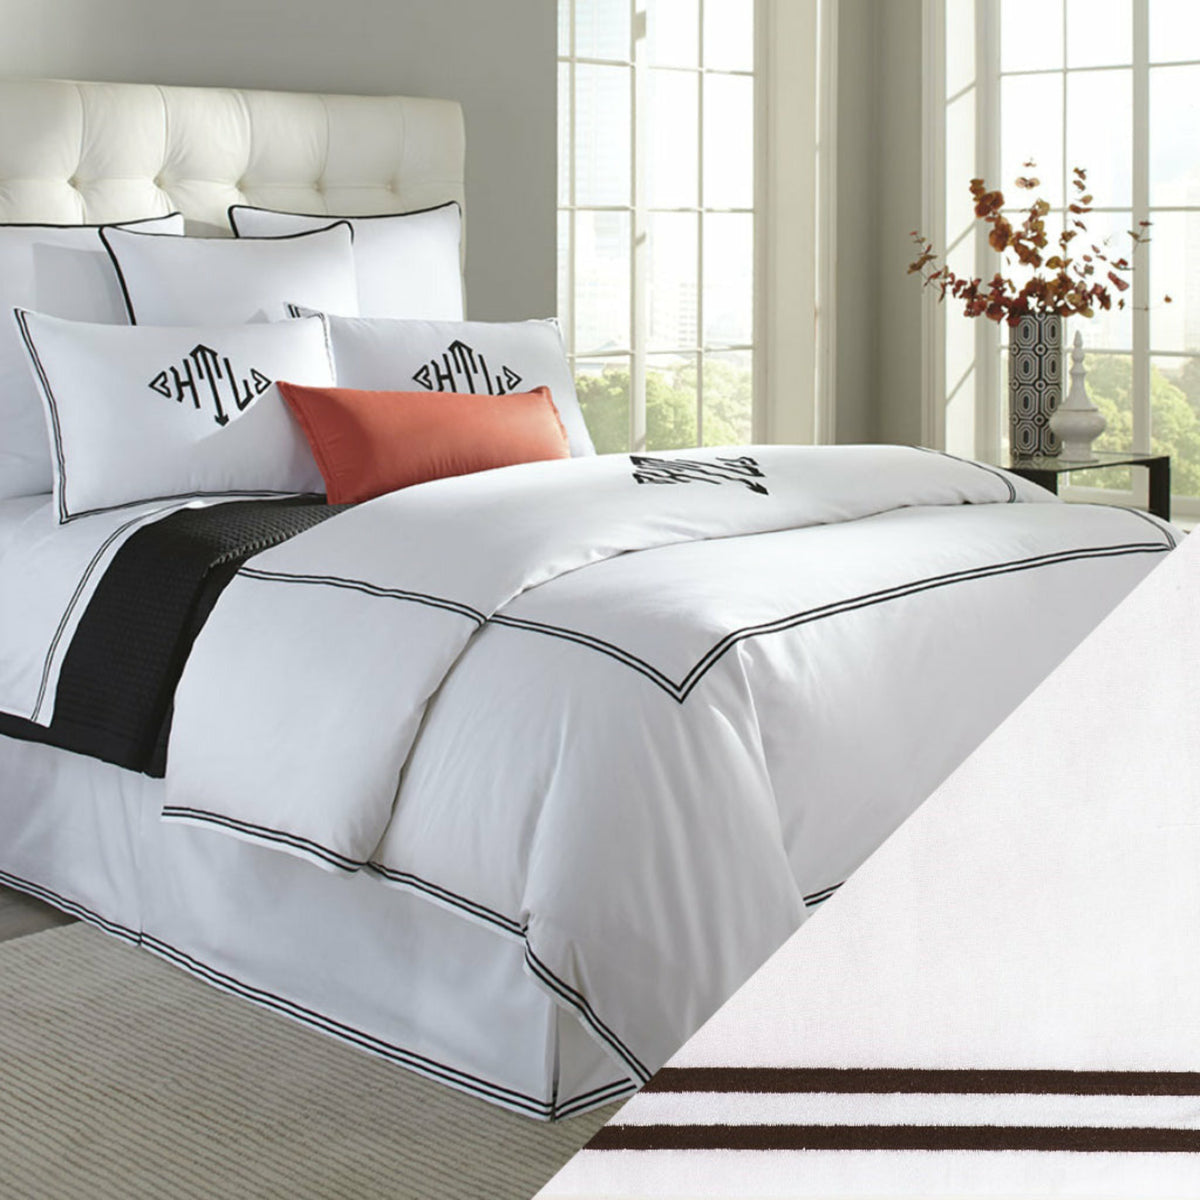 Home Treasures Madison Royal Sateen Hotel Bedding White/Chocolate Fine Linens